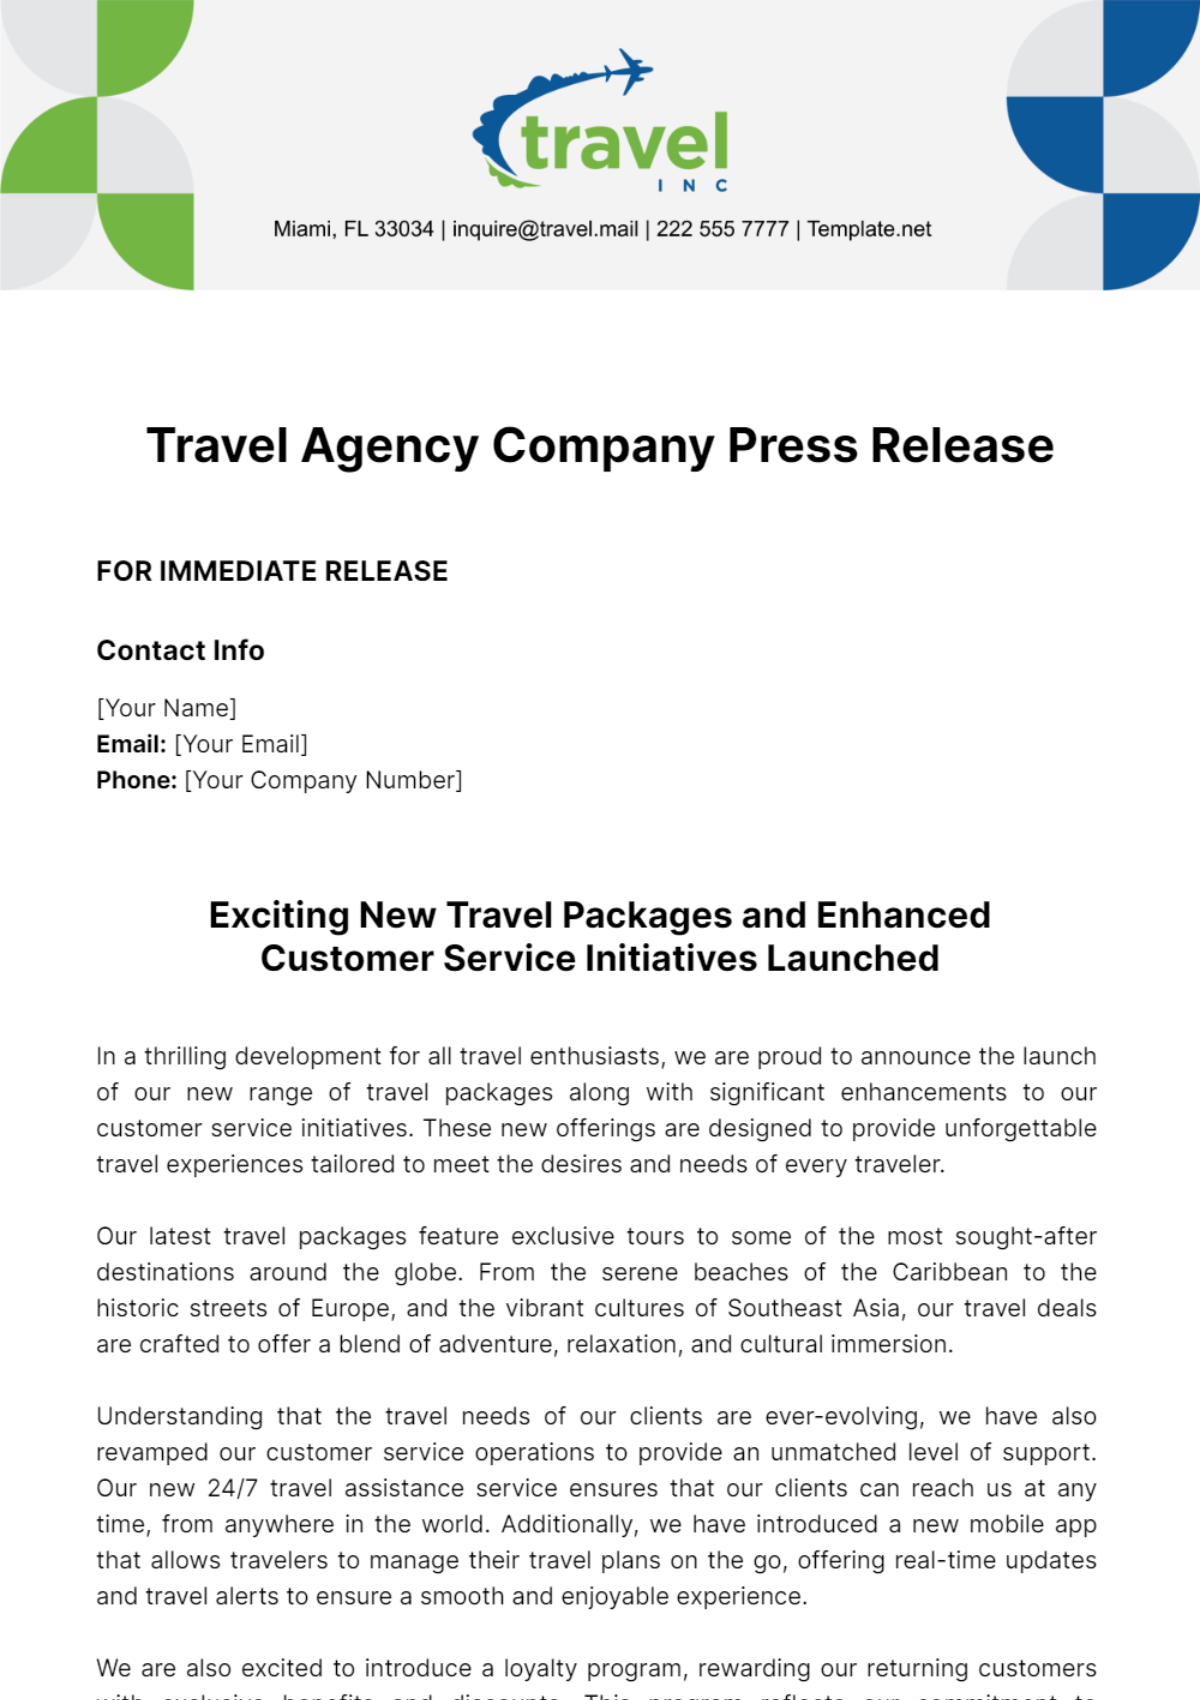 Free Travel Agency Company Press Release Template